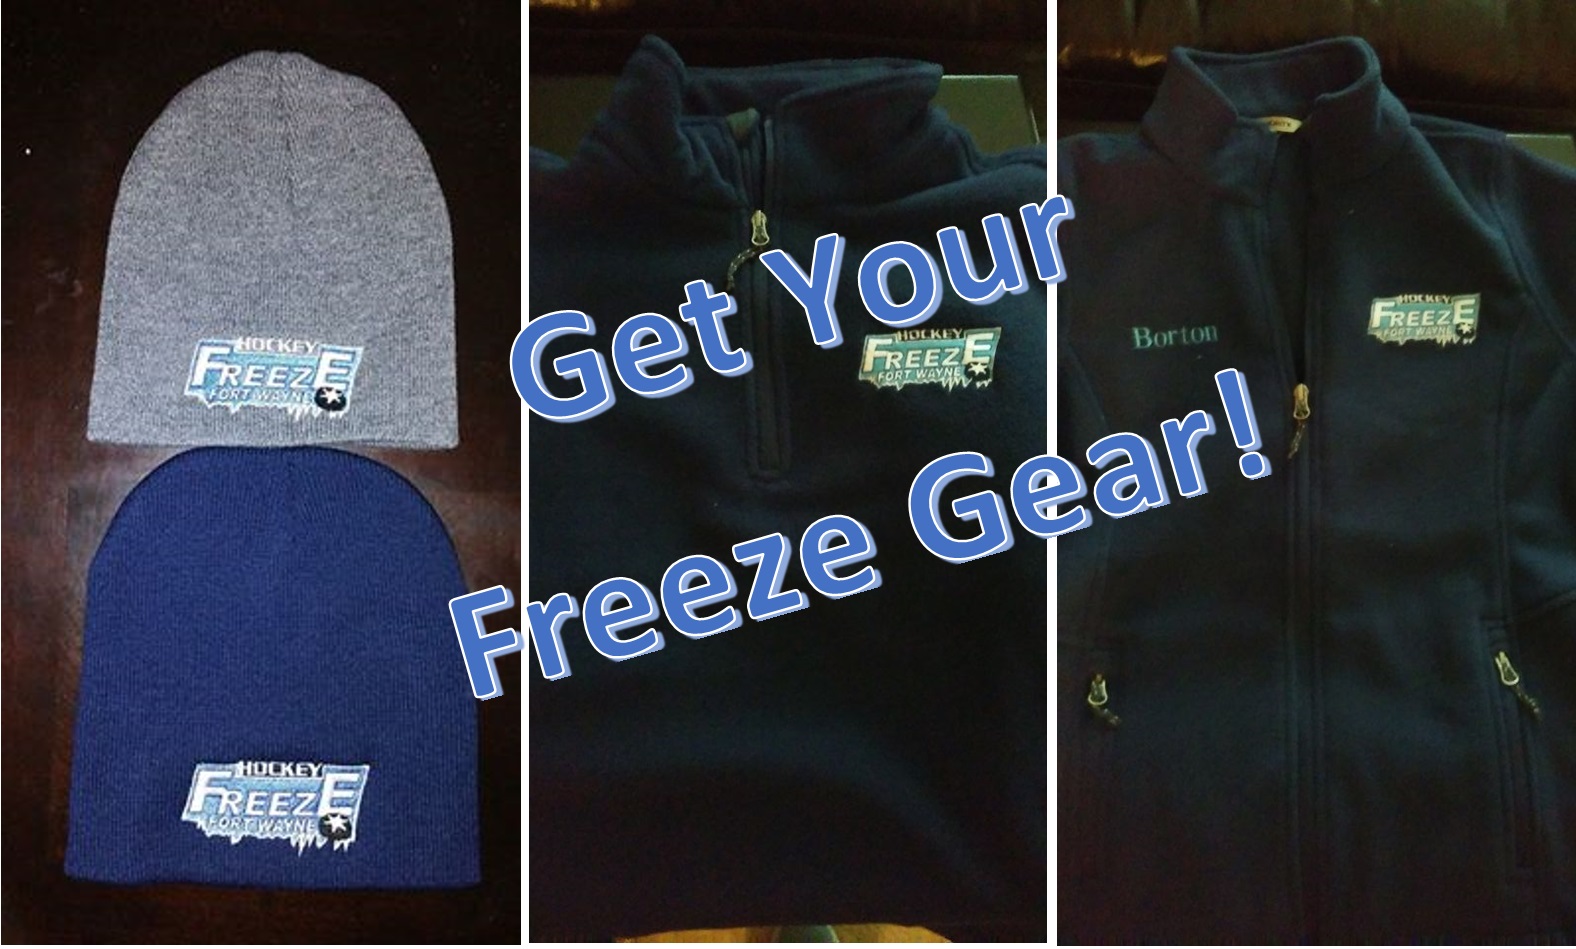 Get Your Freeze Gear!